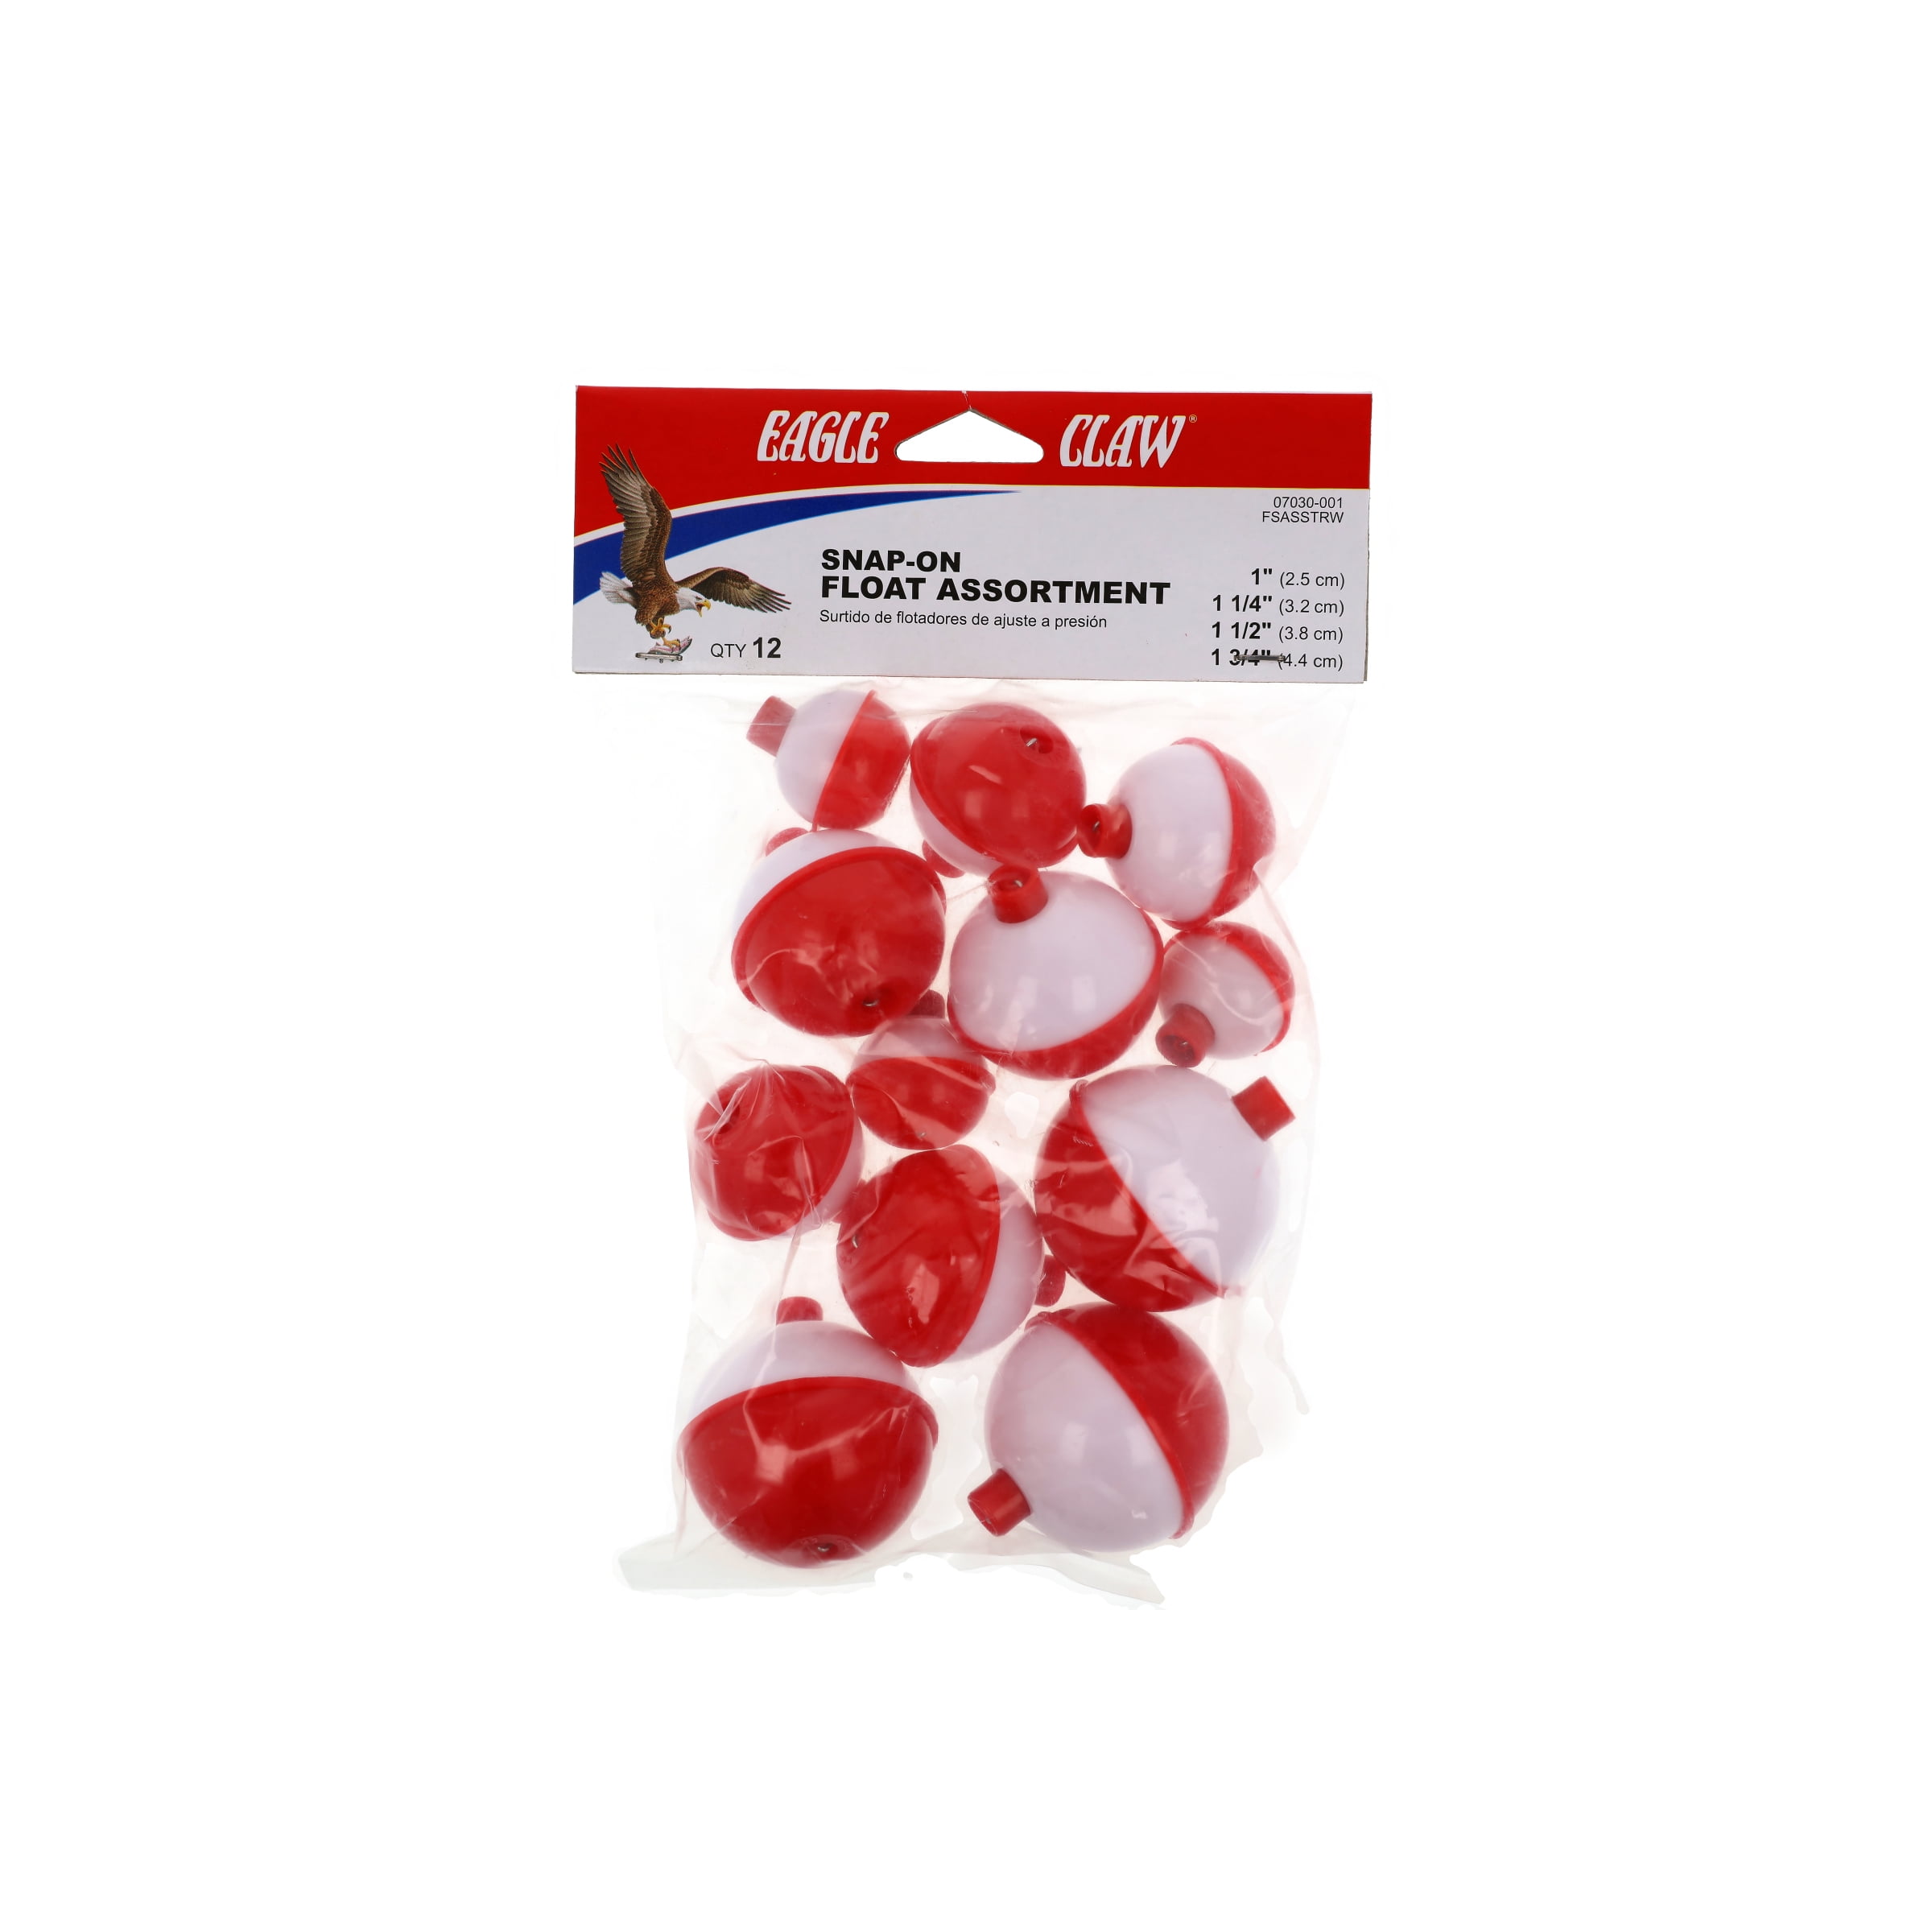 1 PACK OF 12 ASSORTED SIZE FISHING BOBBERS FISHING ROUND FLOATS SNAP ON FLOATS 